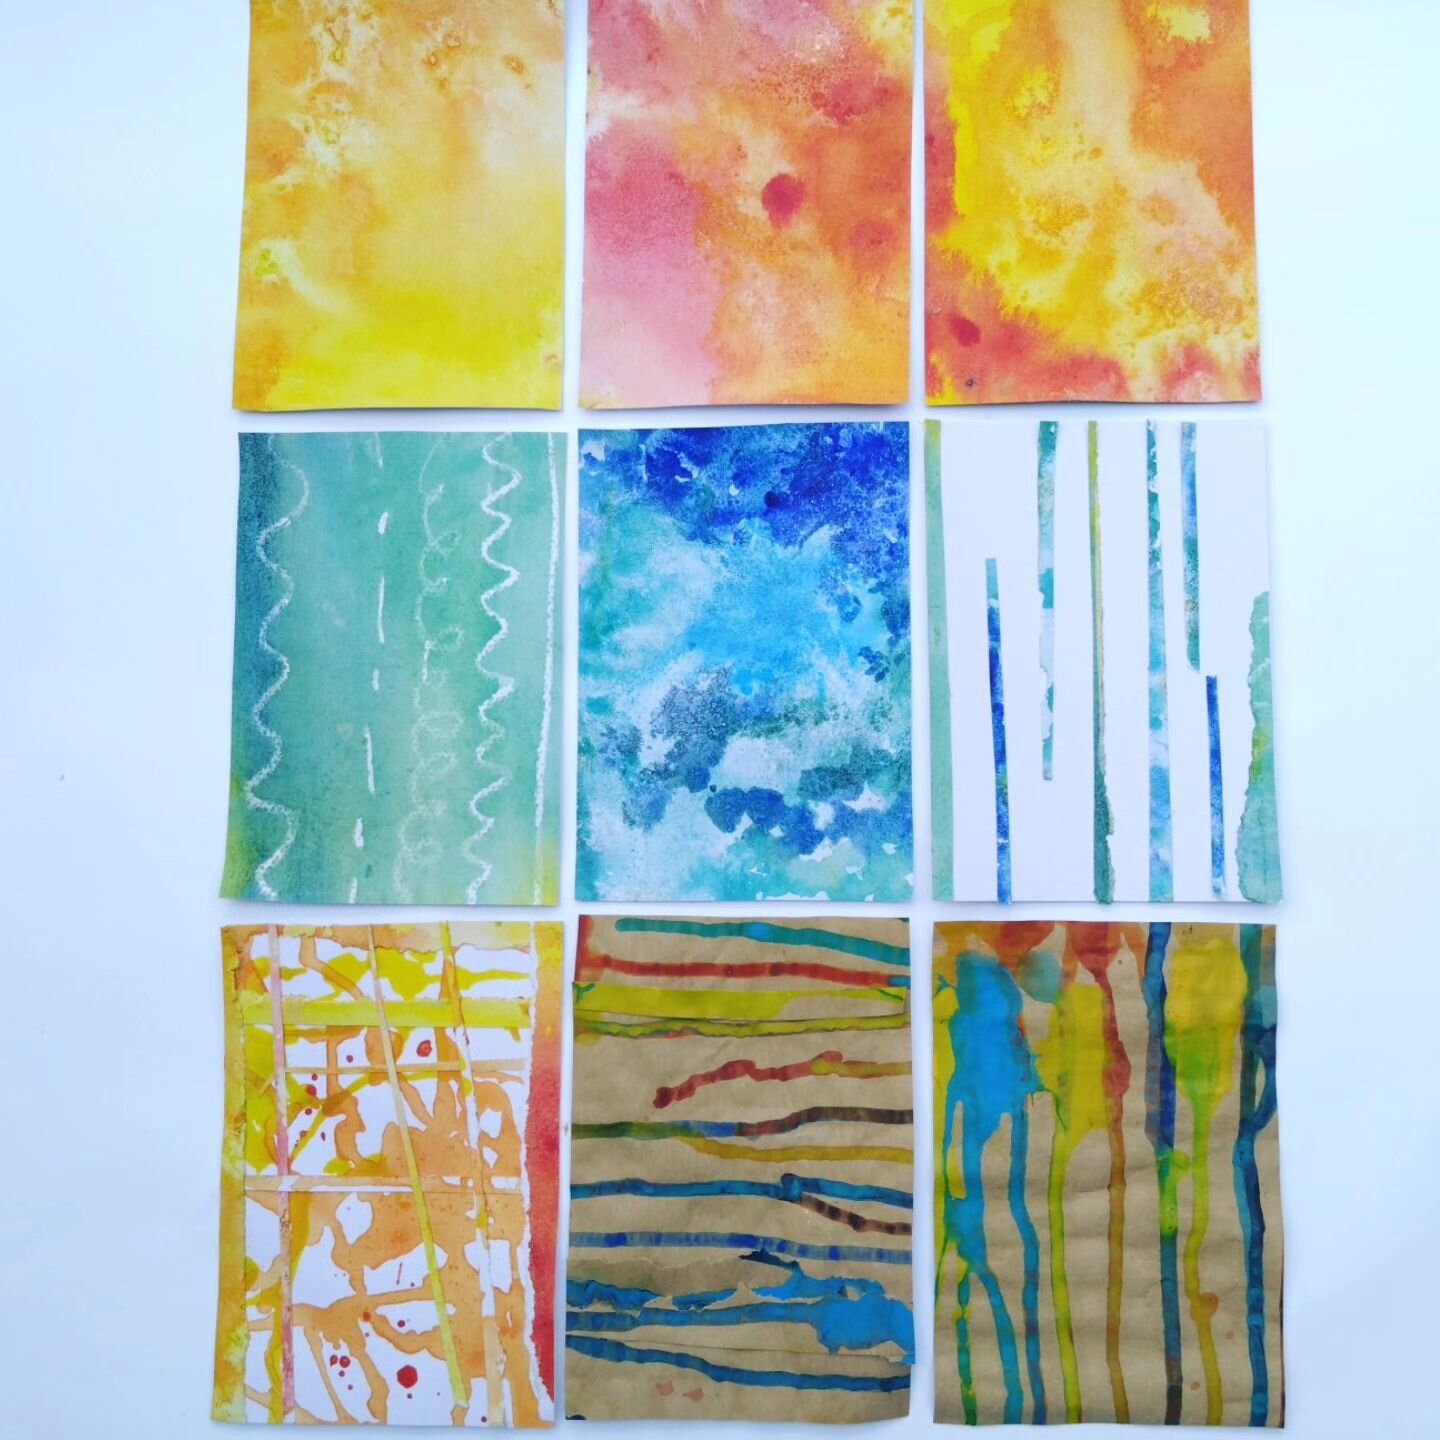 The results of playing with watery paint, whilst demonstrating ideas, in last week's Arts on Referral session have been trimmed to postcard size.

Even the offcuts have become a collage.

Prepared and ready for some stitching...but only when existing